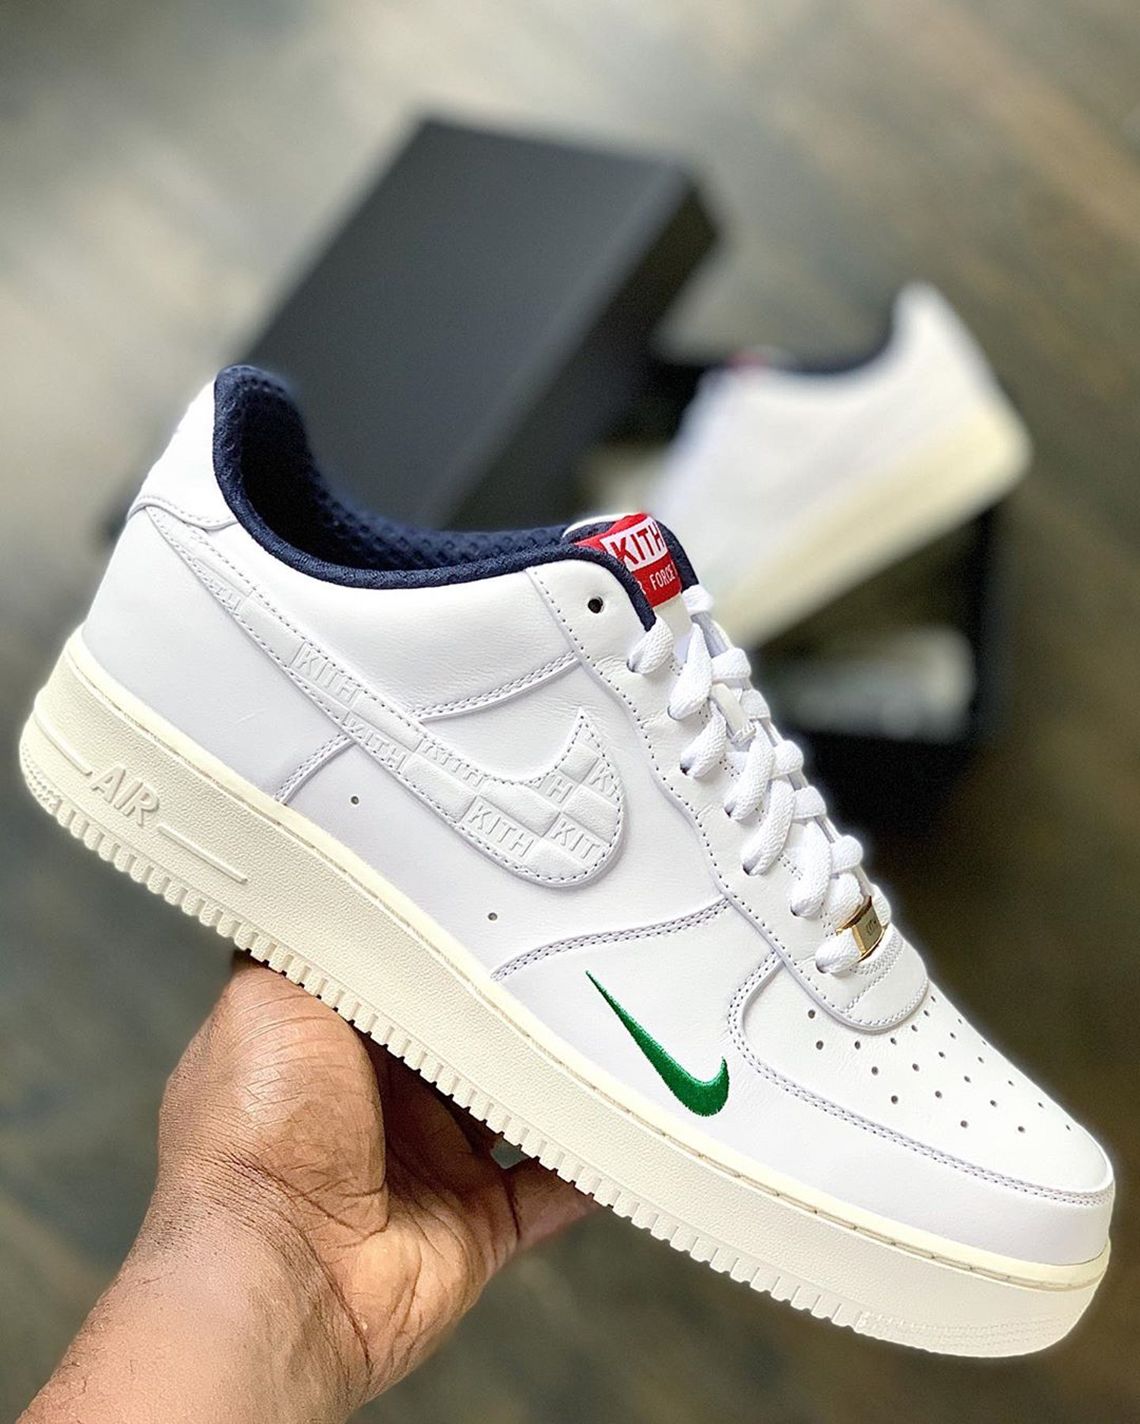 Sneaker on Twitter: "If you were waiting to grab KITH x Nike Air Force 1, I have news: they're F&amp;F exclusive https://t.co/xcfBDnkPDO https://t.co/lP6XWETMcA" / Twitter